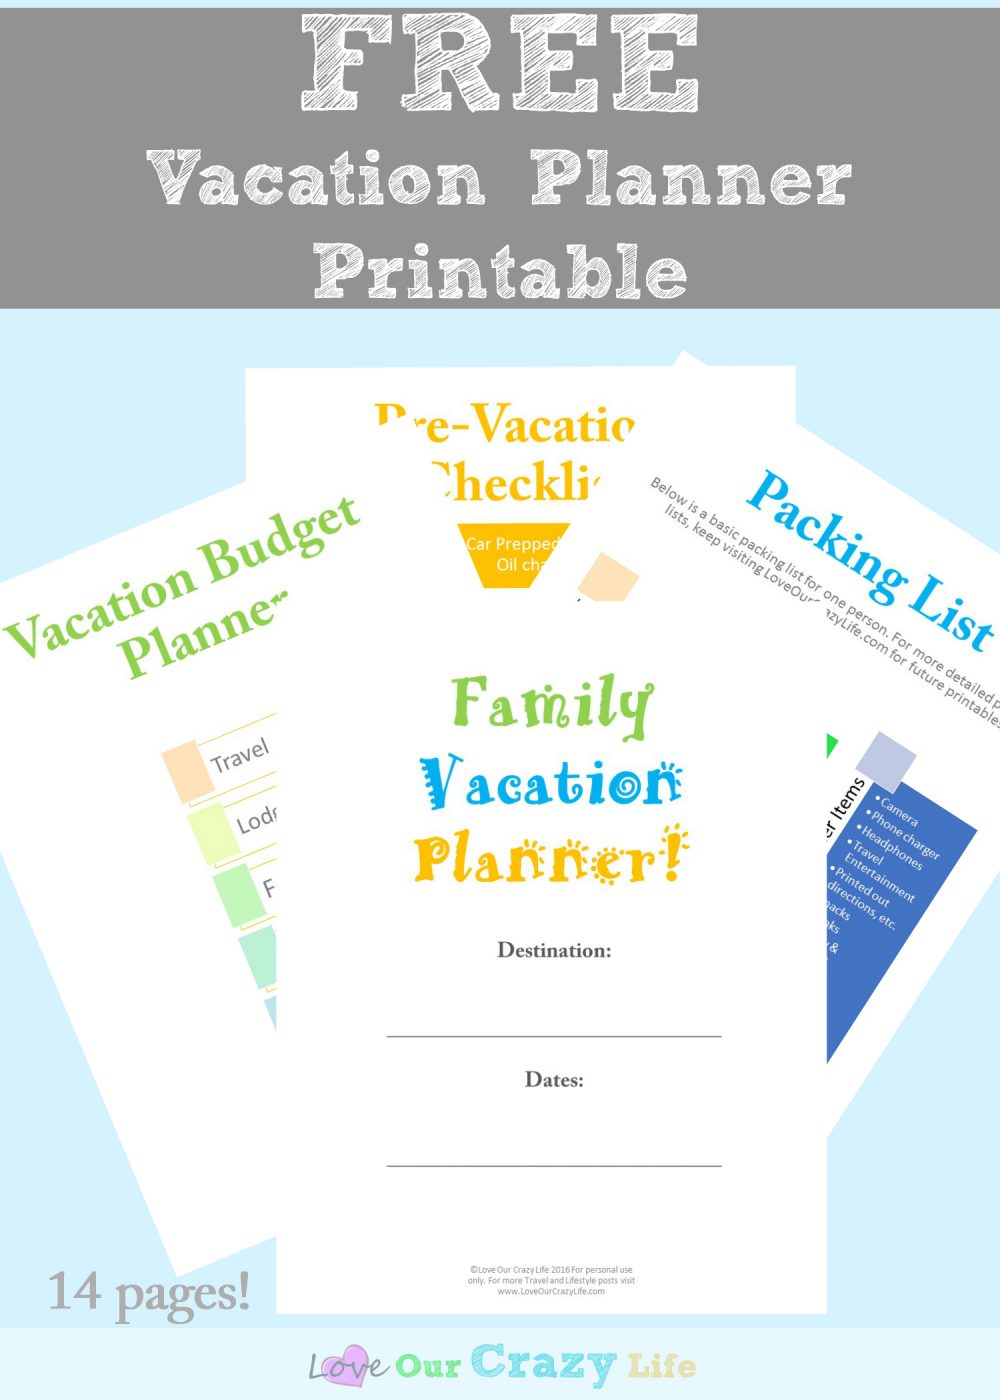 Free Vacation Planner Printable. 14 pages of free printables for planning vacations including budget sheets, packing lists, and more! Plus some great tips.